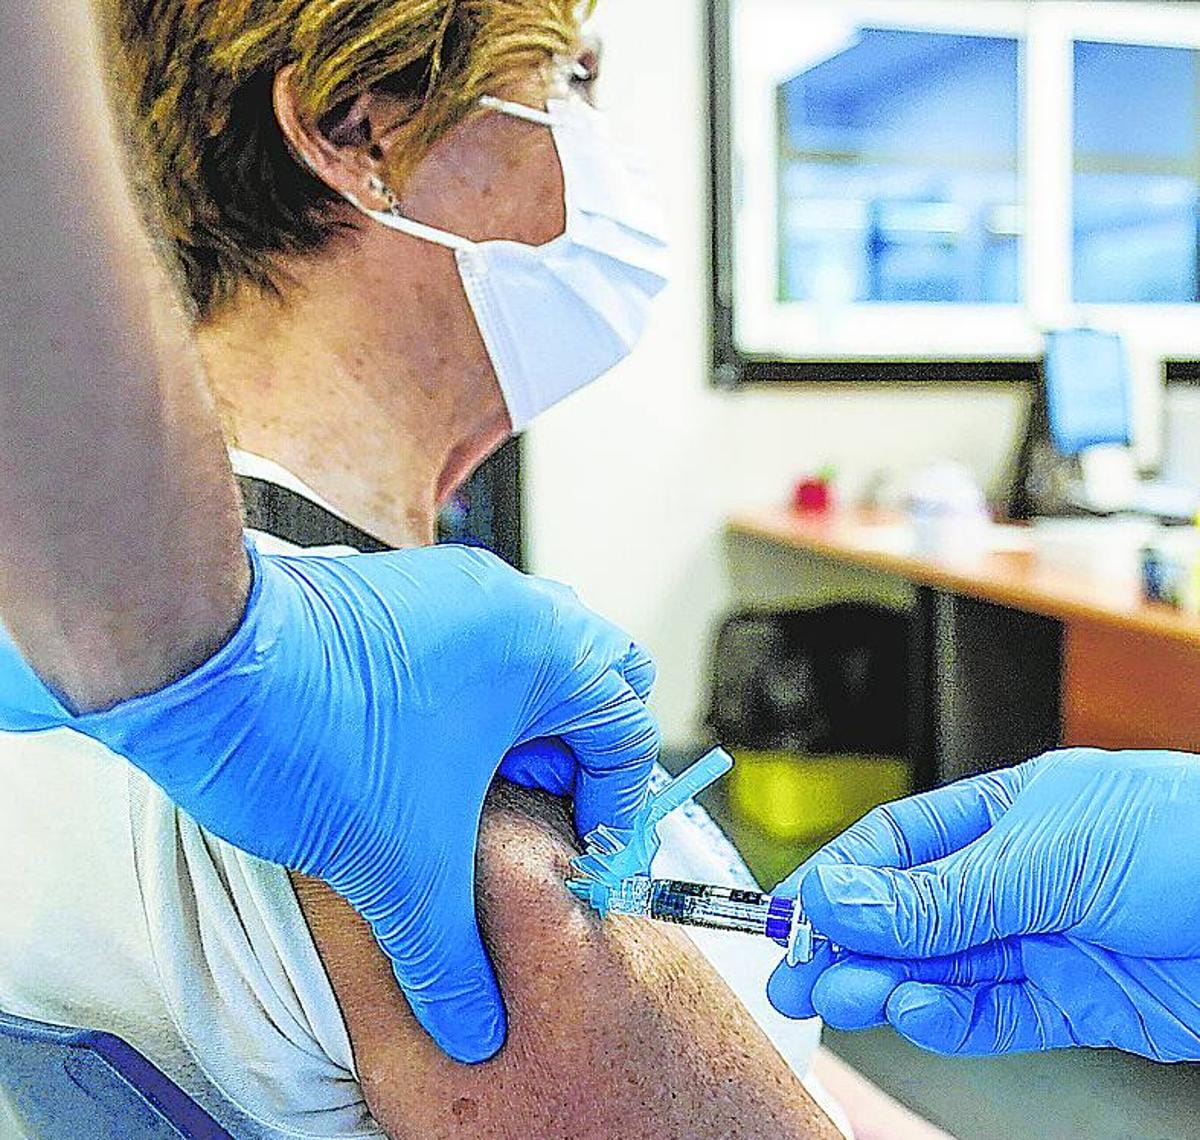 Flu and COVID vaccination campaigns to start later this month